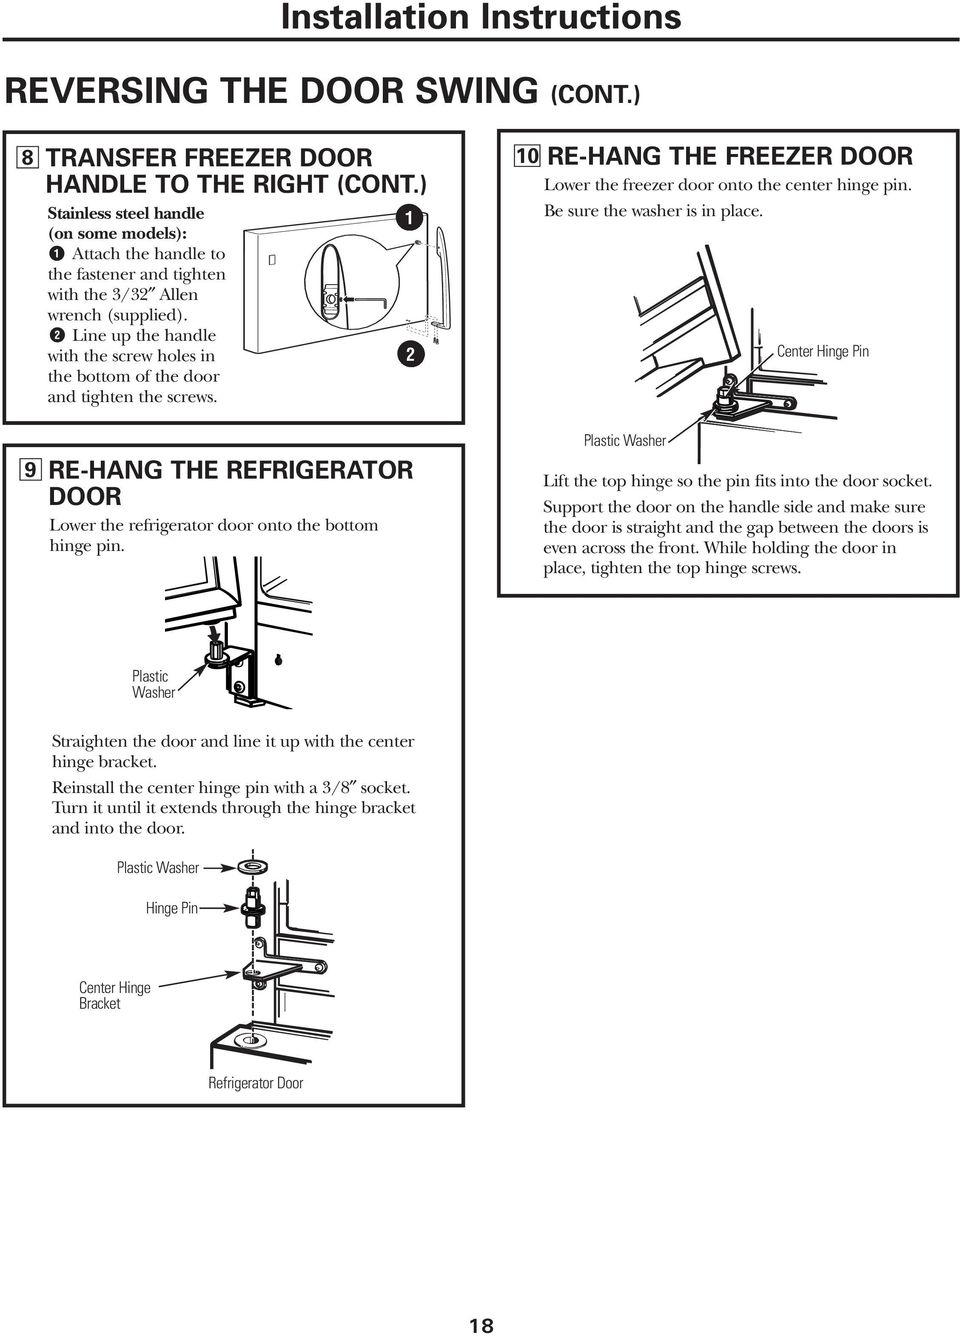 Line up the handle with the screw holes in the bottom of the door and tighten the screws. RE-HANG THE REFRIGERATOR DOOR Lower the refrigerator door onto the bottom hinge pin.